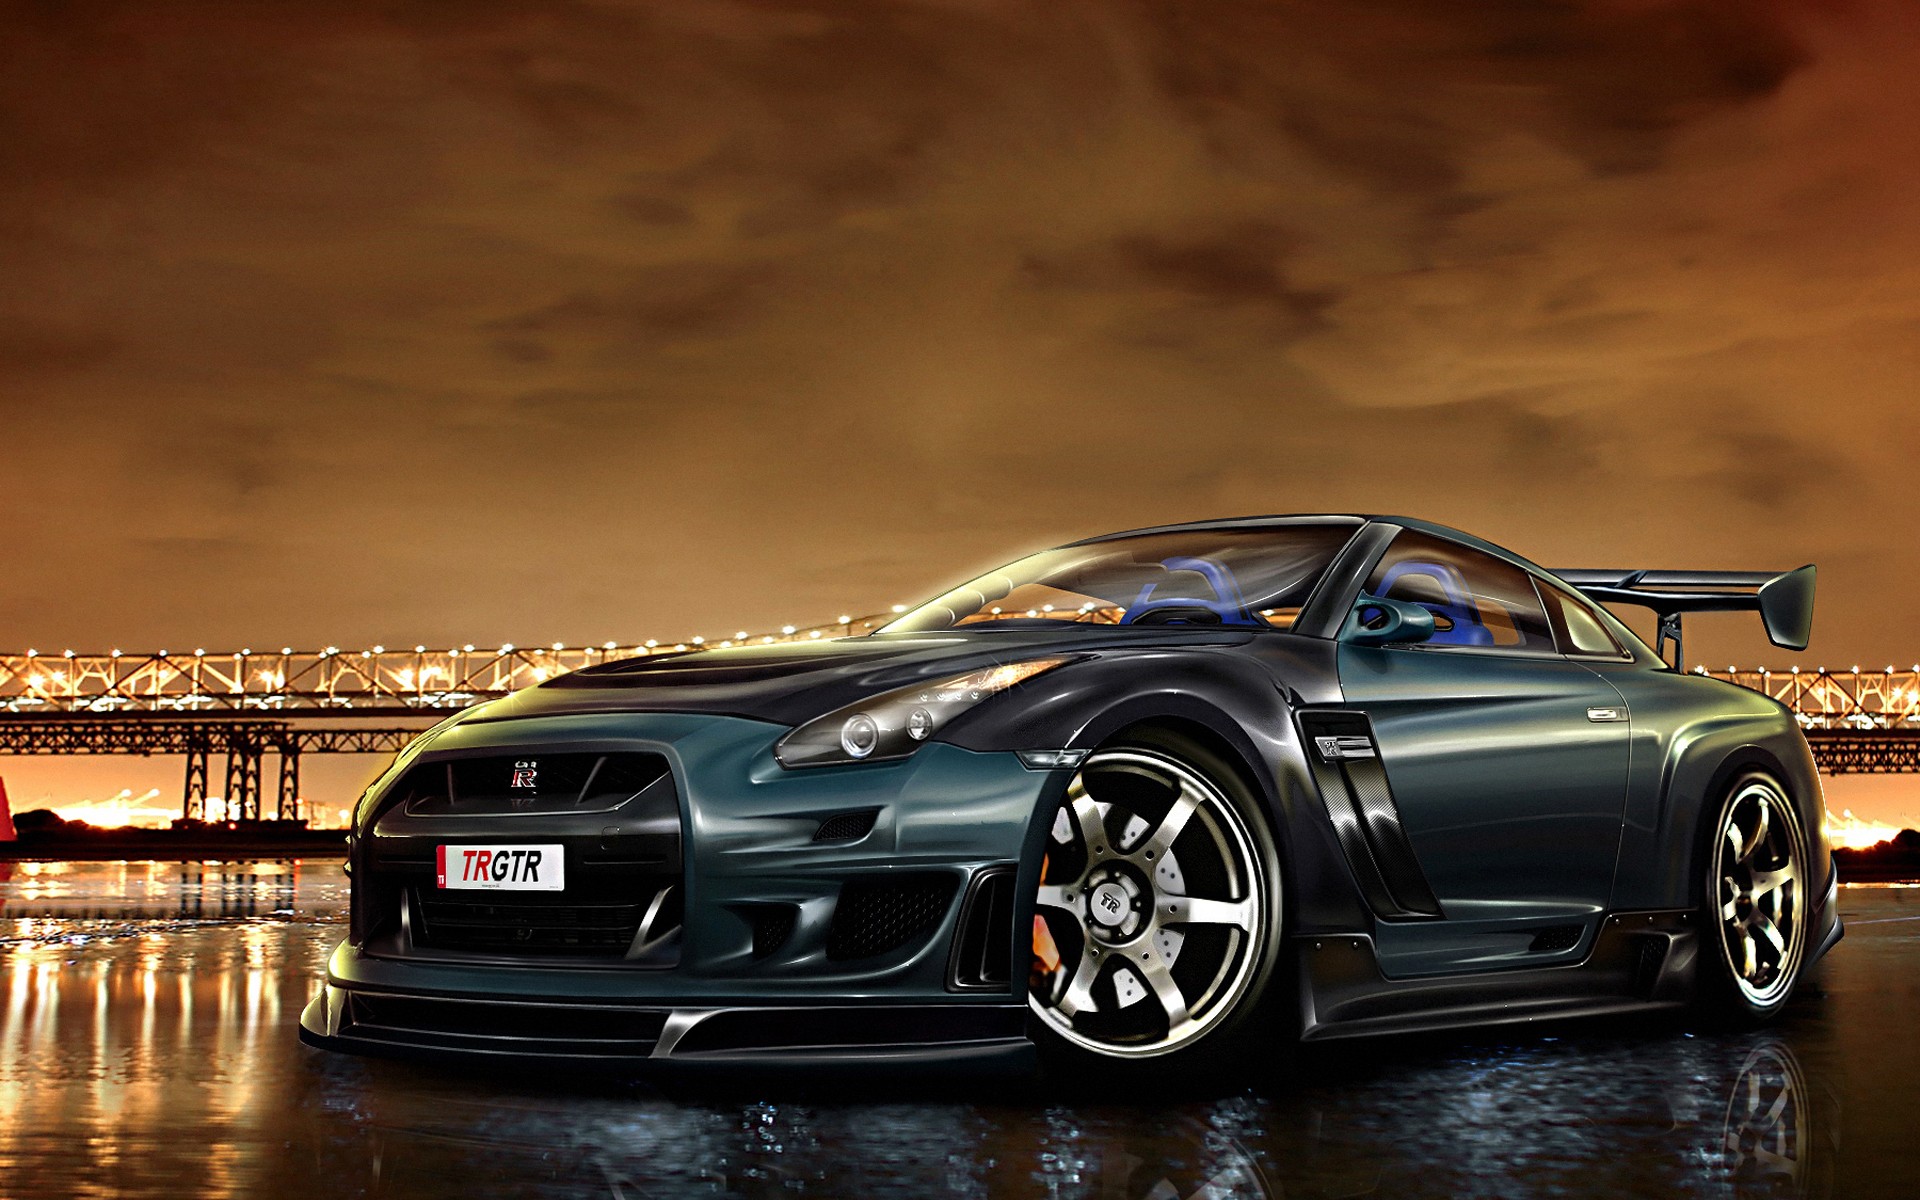 Super Cars Wallpaper Vehicles That Stun The People Nissan Gt R